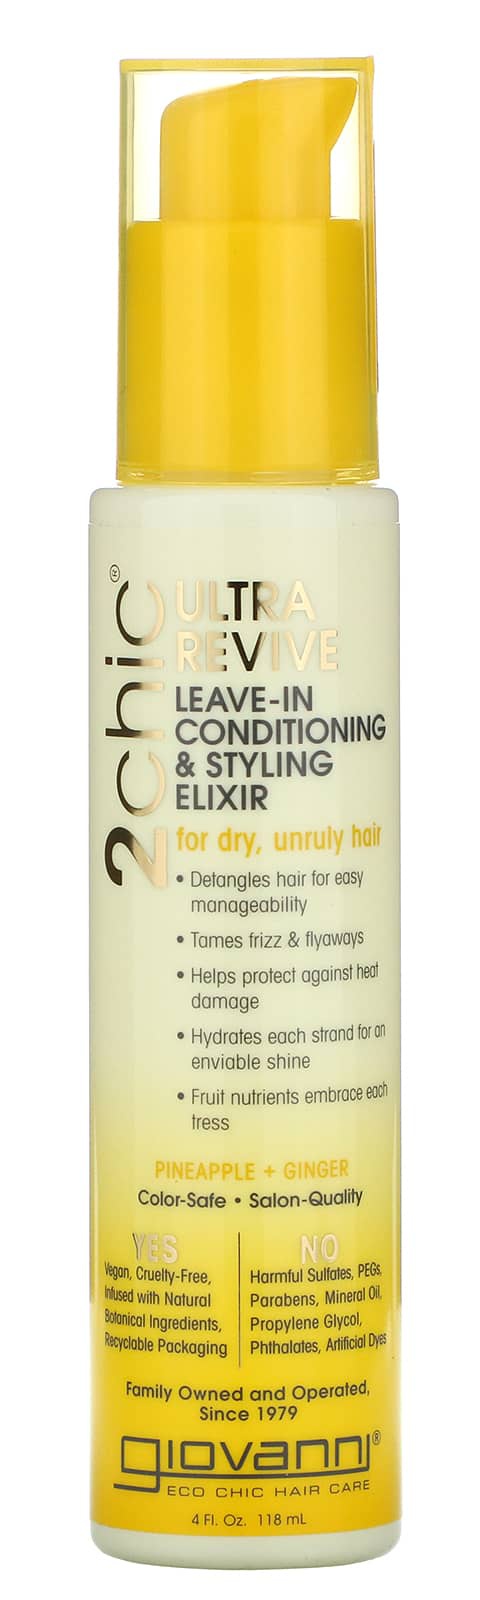 Giovanni 2chic Ultra-revive Leave-in Conditioner & Styling Elixir